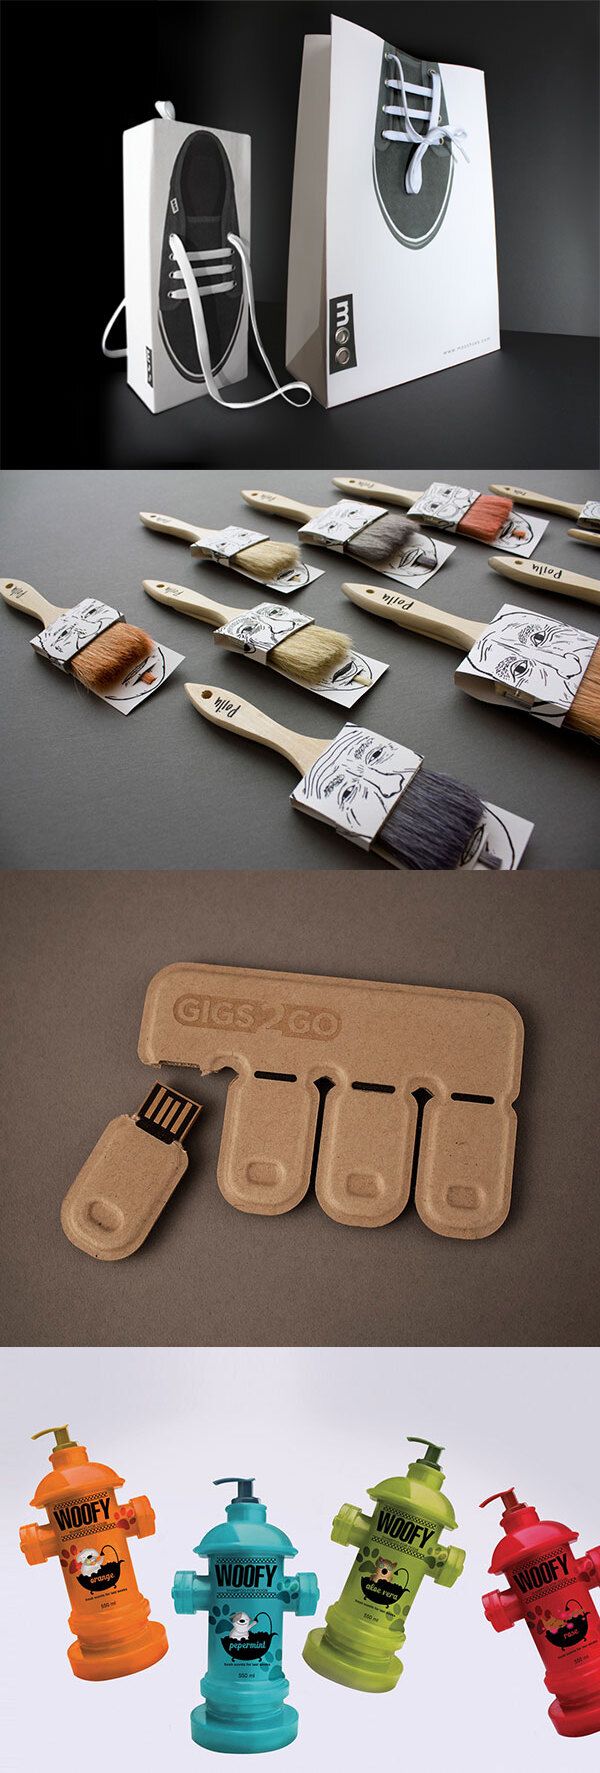 22 Creative Packaging Designs You’ll Want To Steal